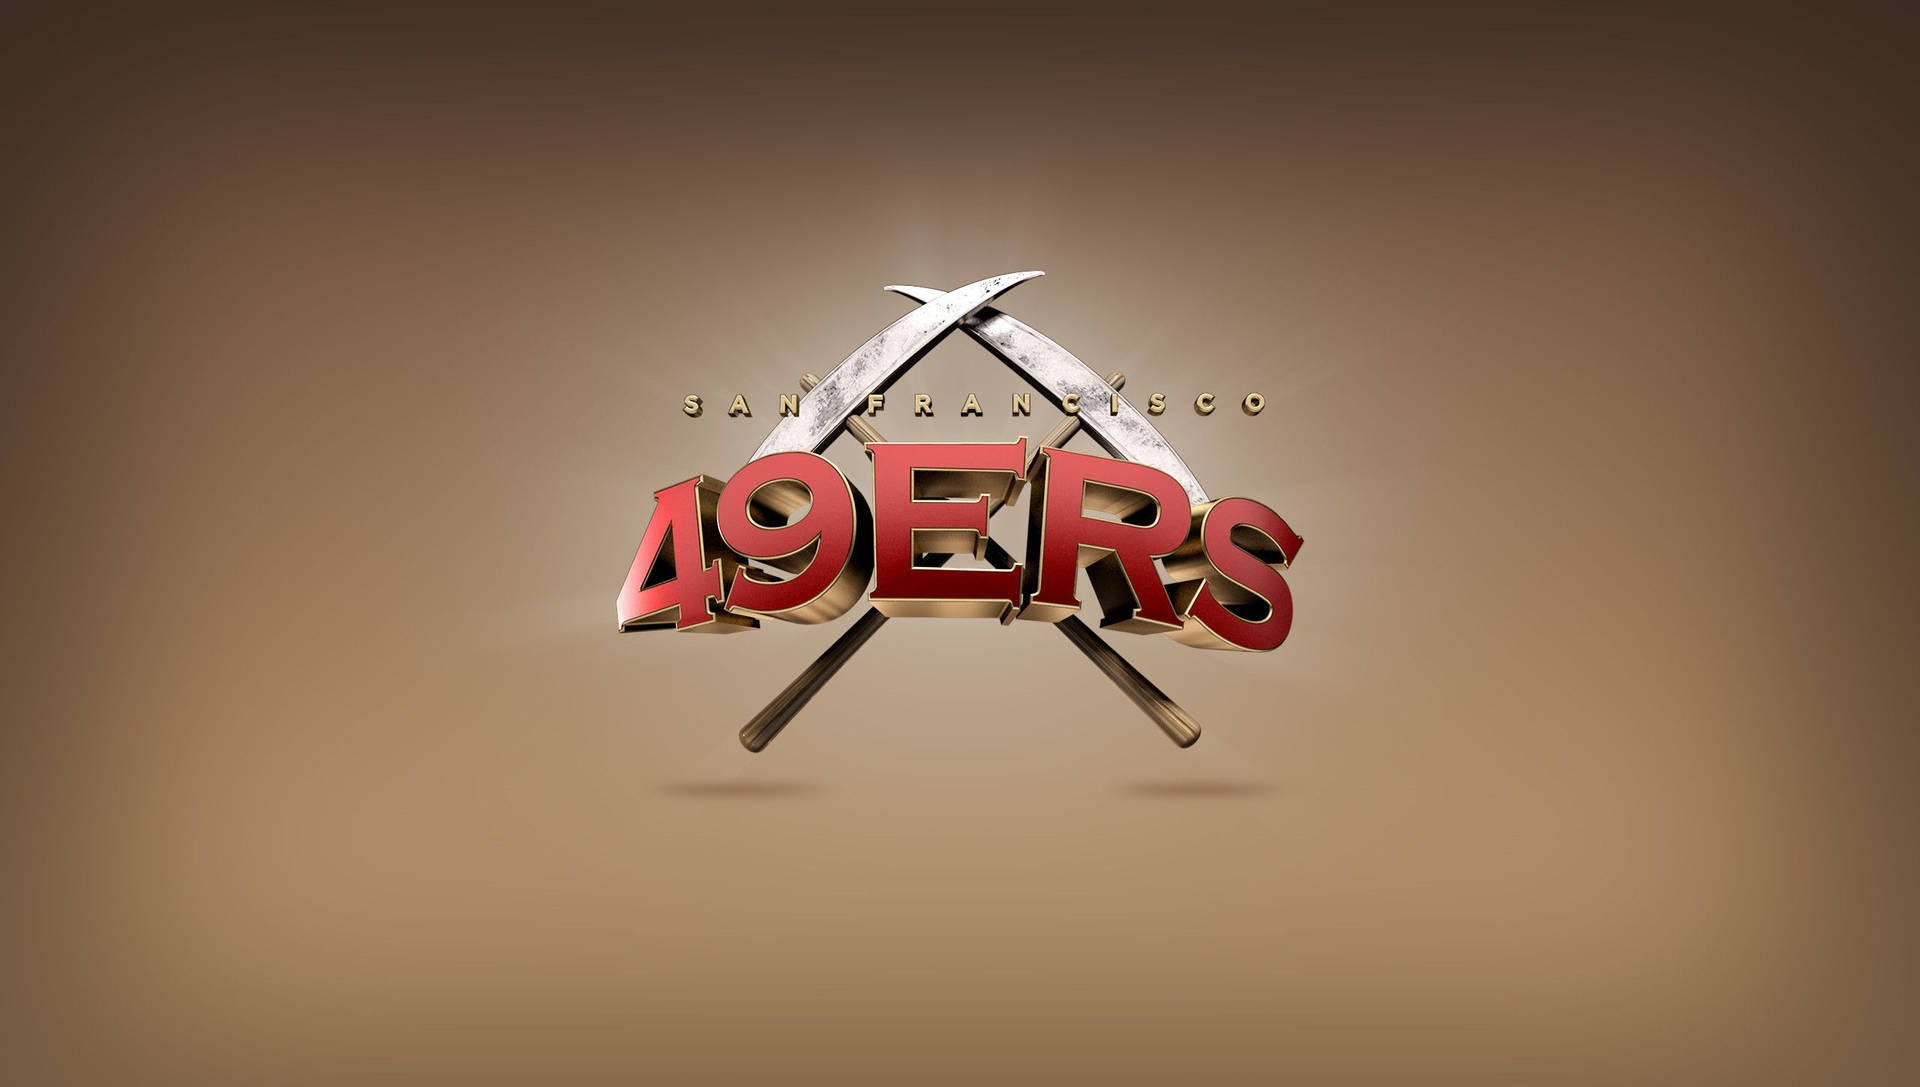 San Francisco 49ers Pictures Wallpaper